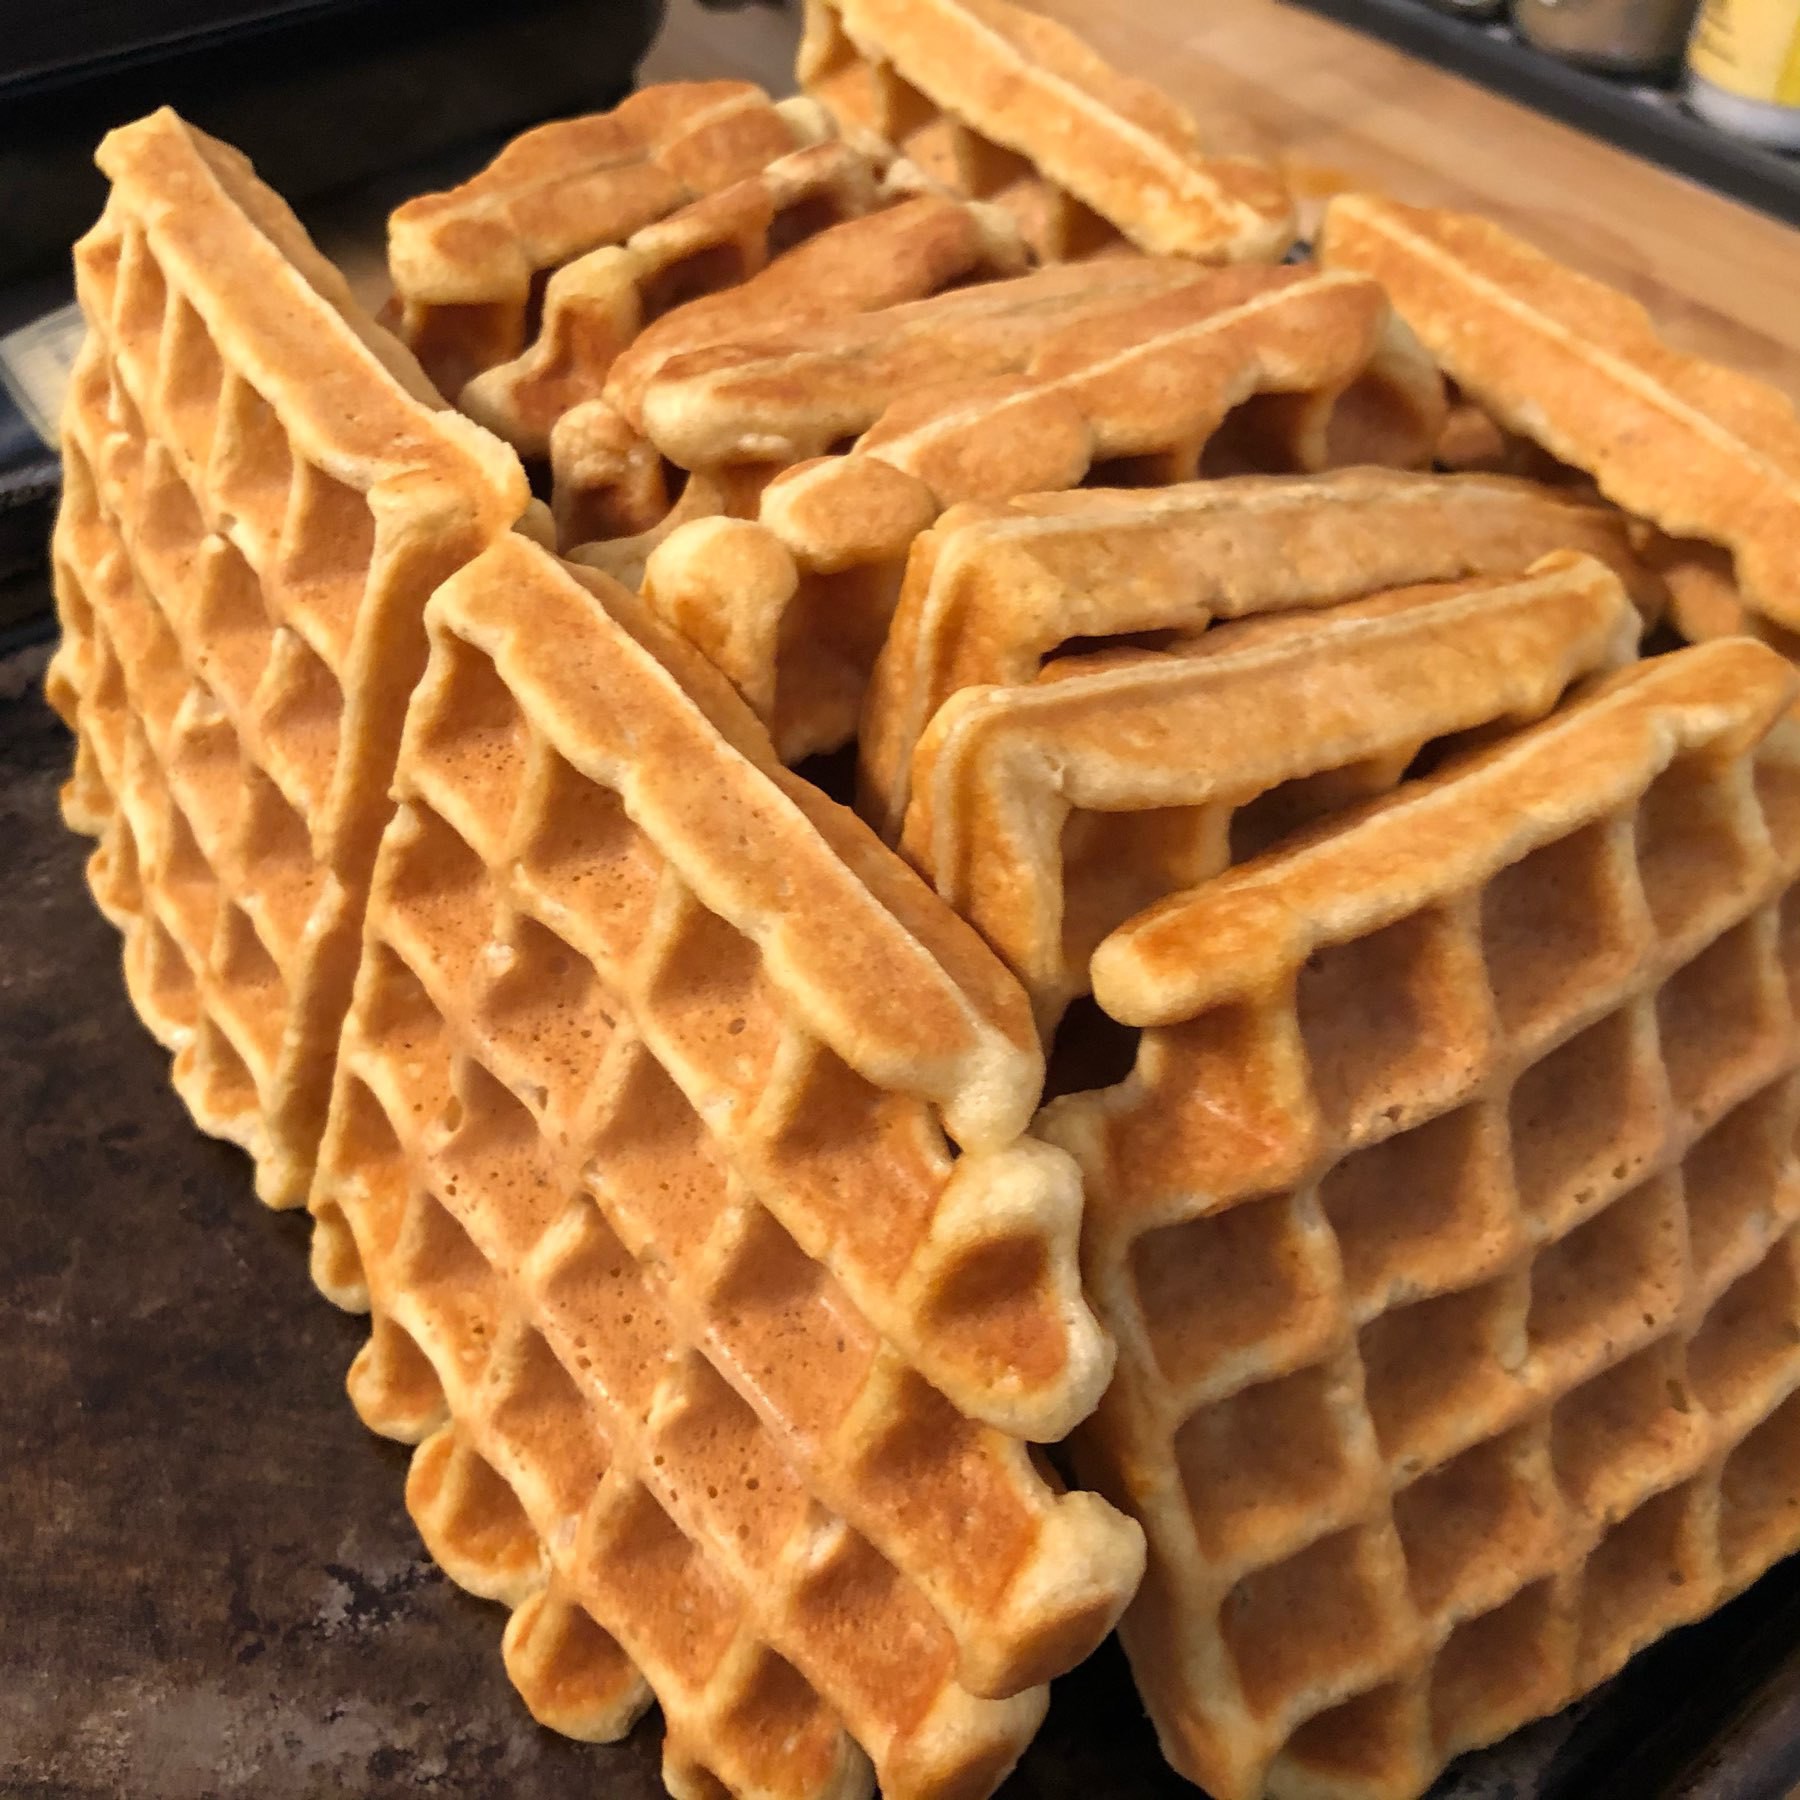 Stacks of home-made waffles.